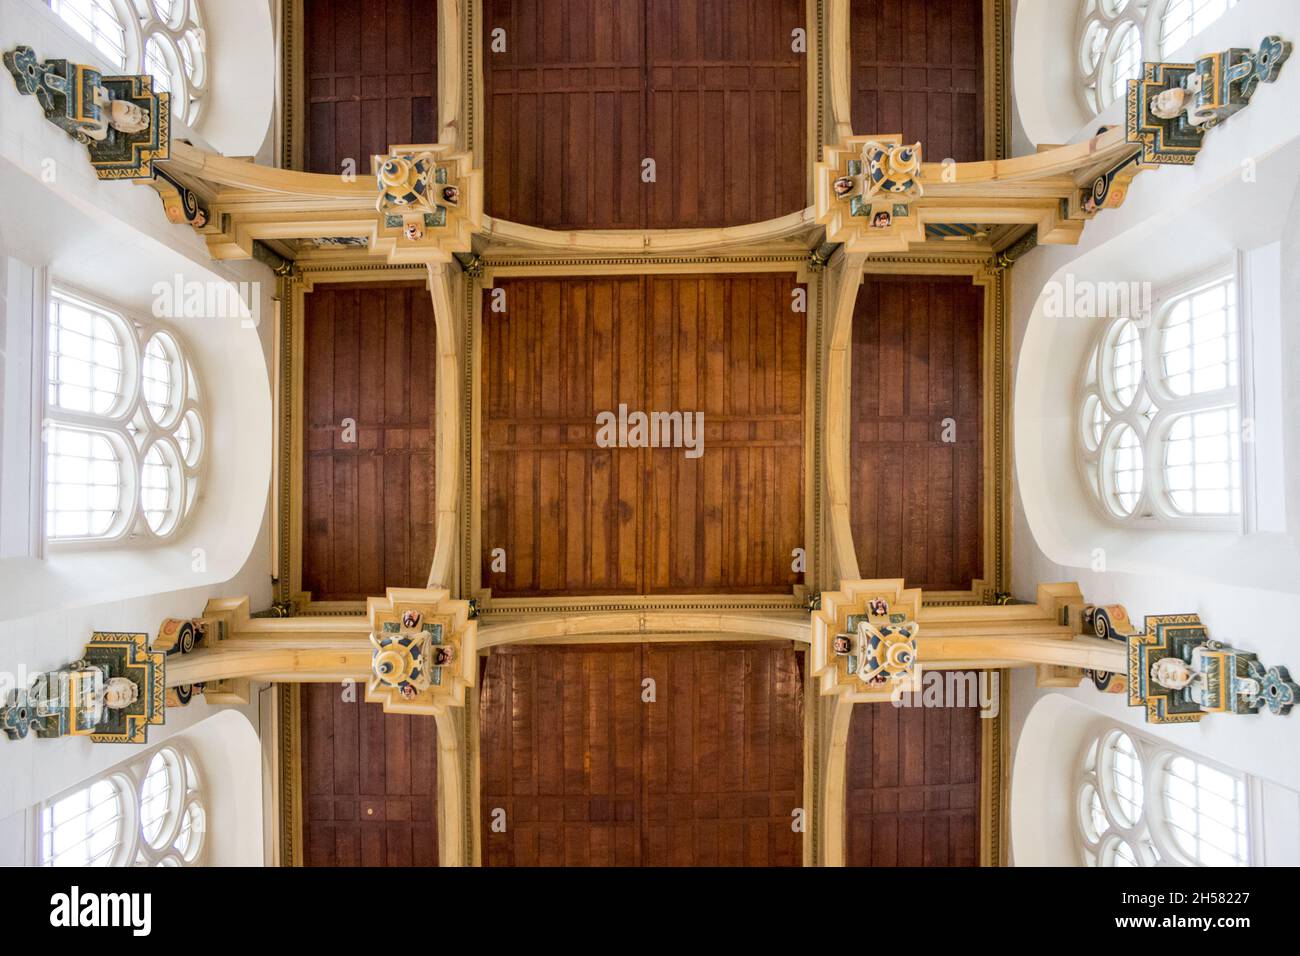 Medieval Ceiling Design, Architecture Stock Photo